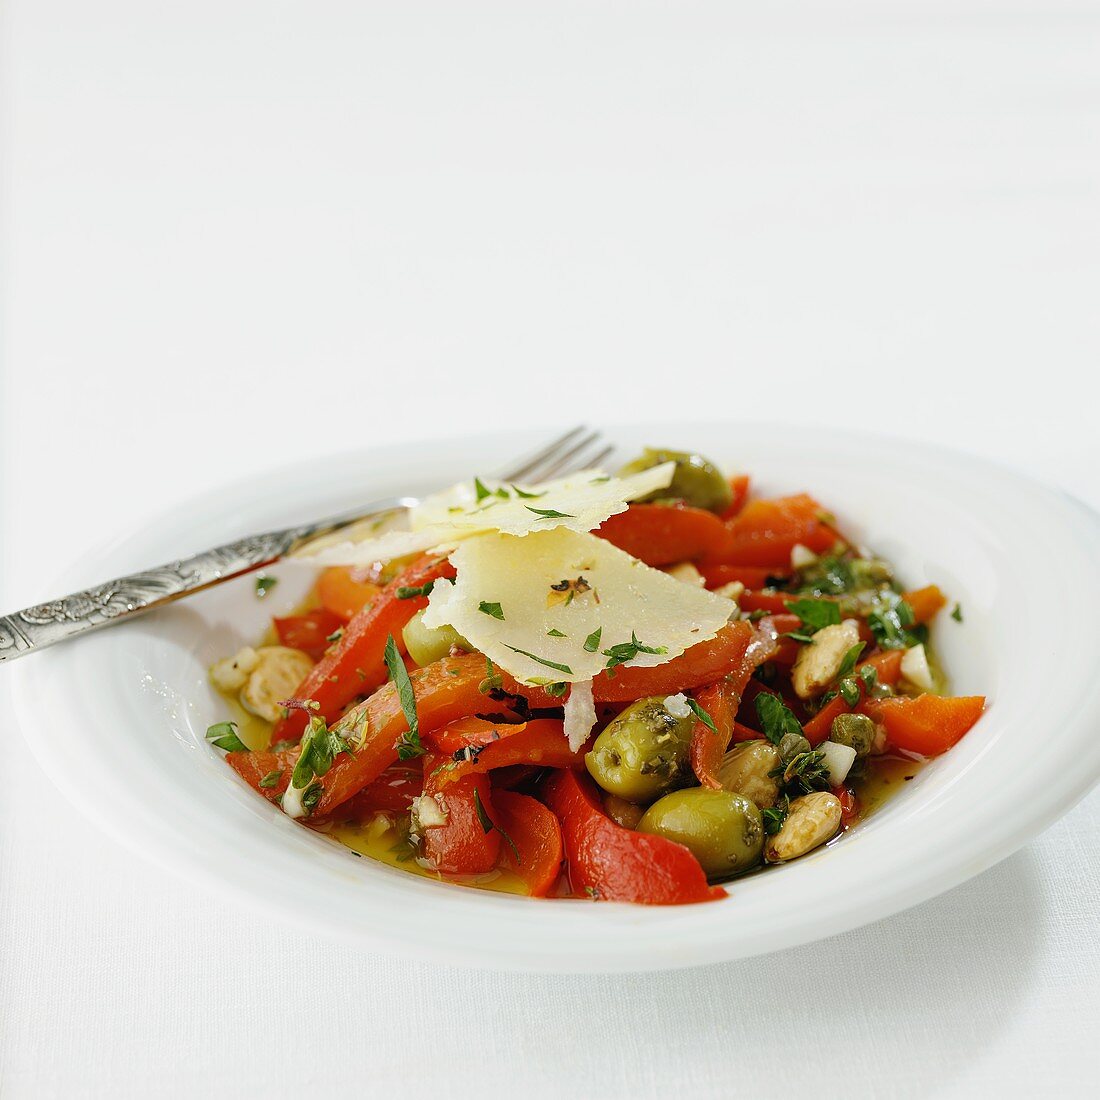 Roasted Red Pepper Salad with Green Olives and Shaved Parmesan